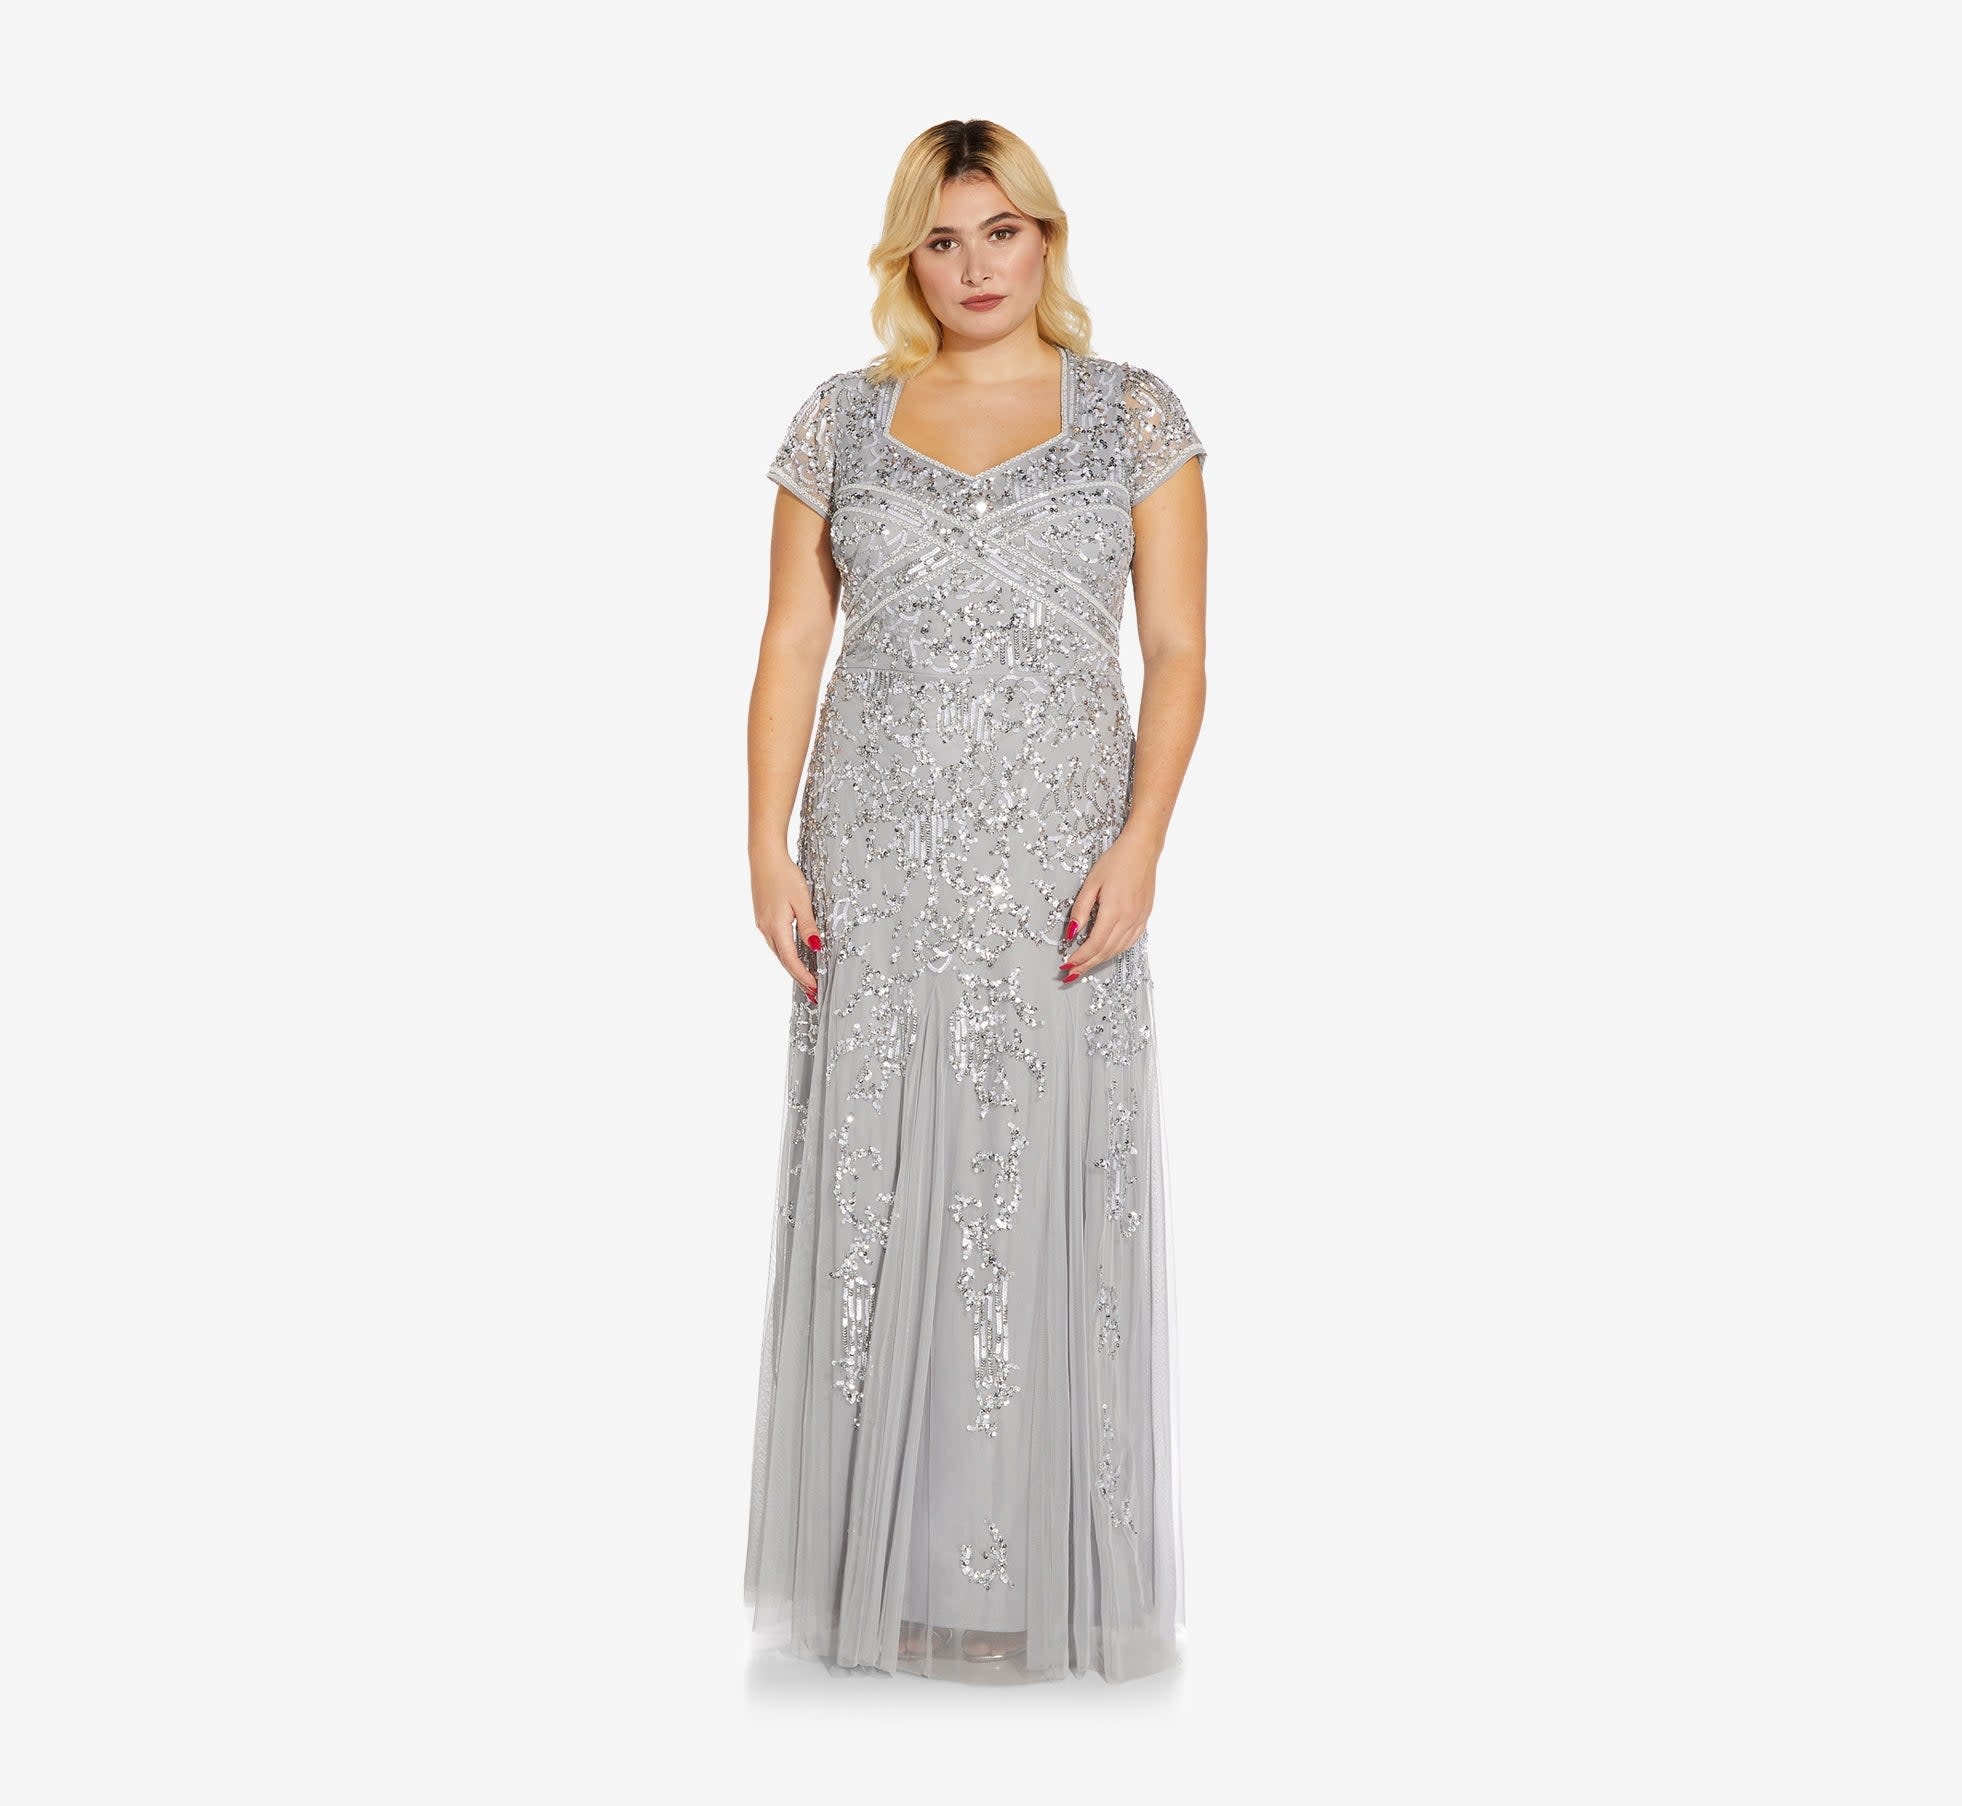 ADRIANNA PAPELL ADRIANNA PAPELL BEAD GODET LONG GOWNS